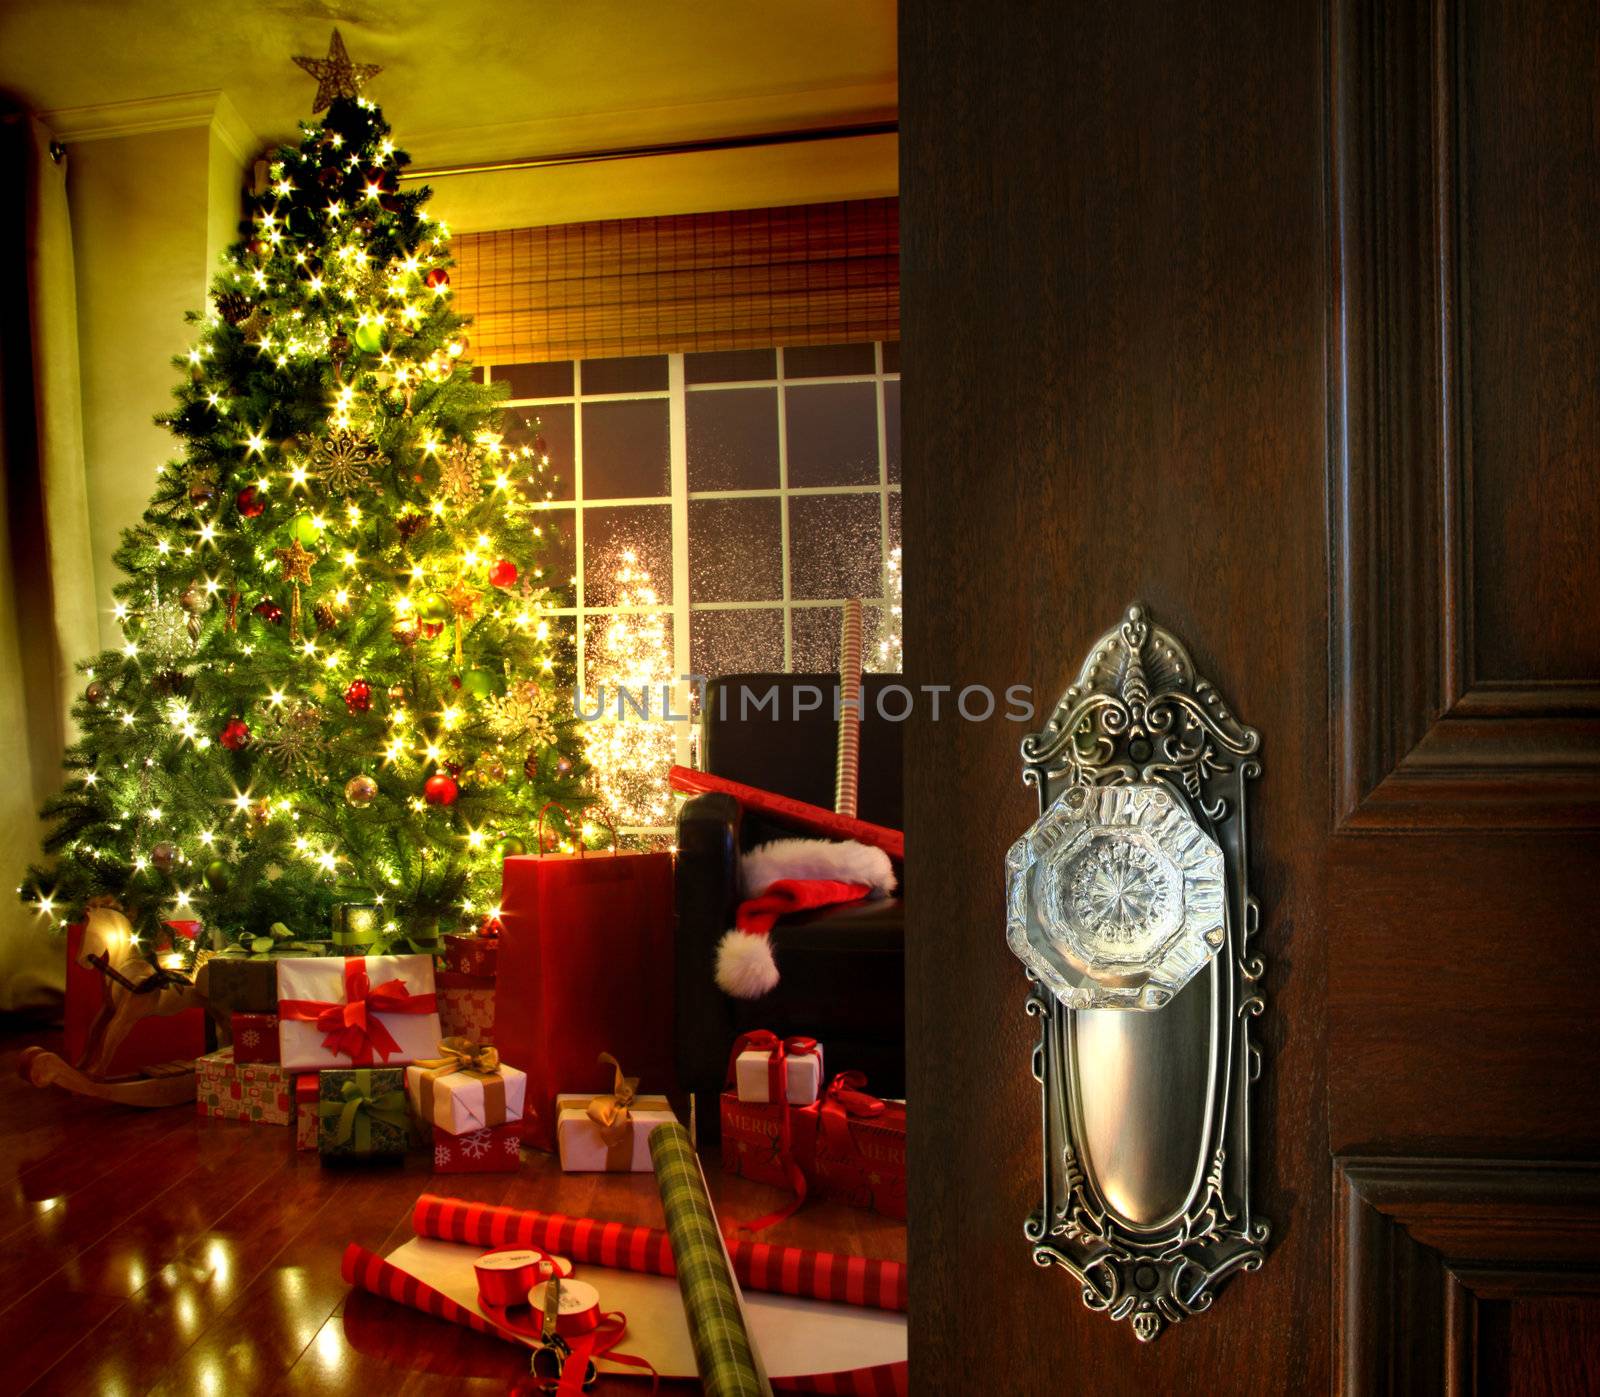 Door opening into a Christmas living room by Sandralise